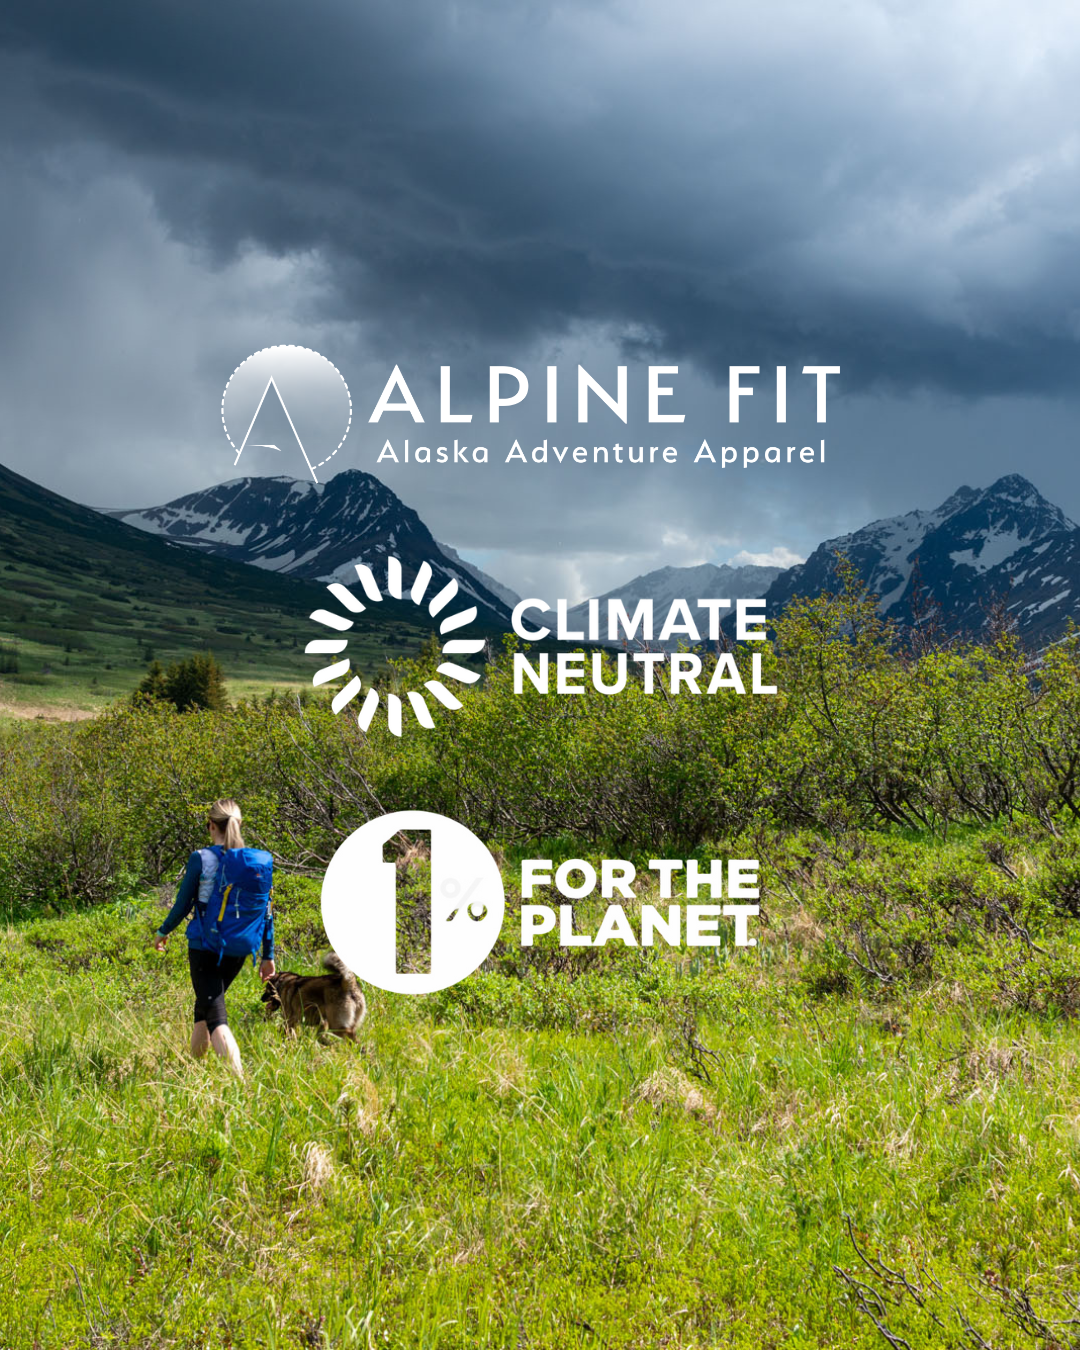 Alpine Fit Joins 1% for the Planet and becomes Climate Neutral Certified